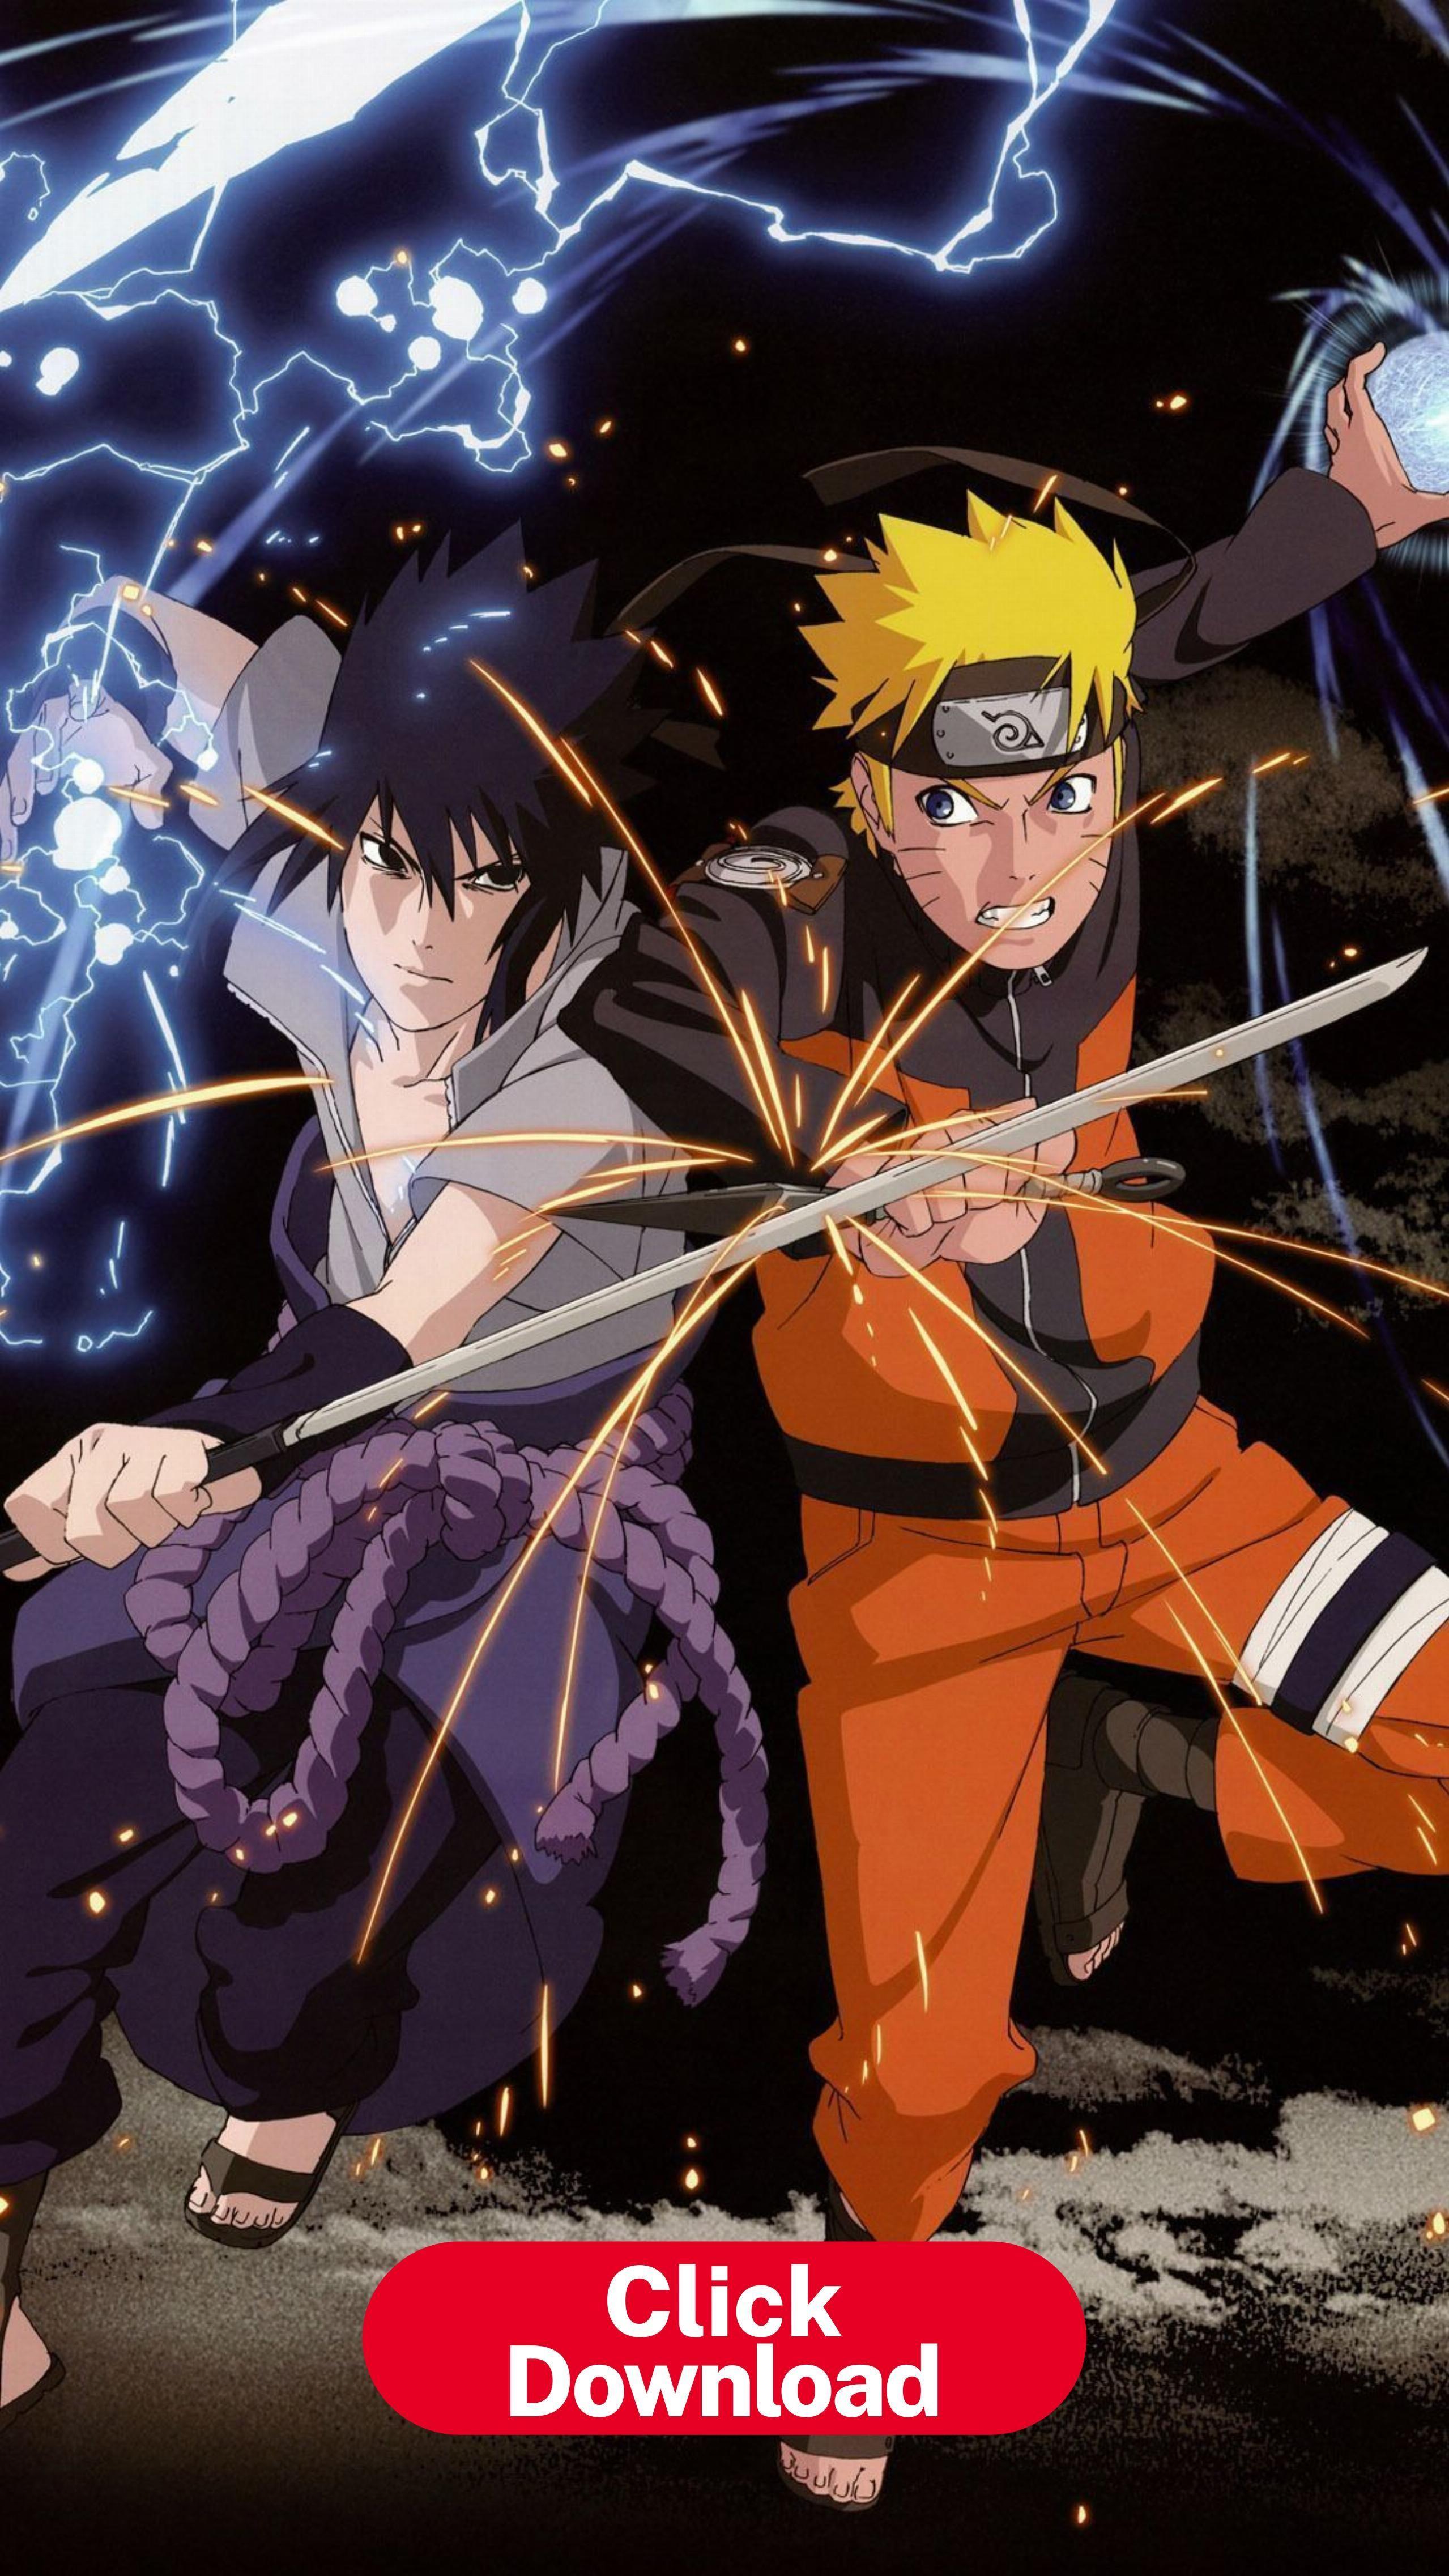 Awesome Naruto Phone Wallpaper Hd Picture Image